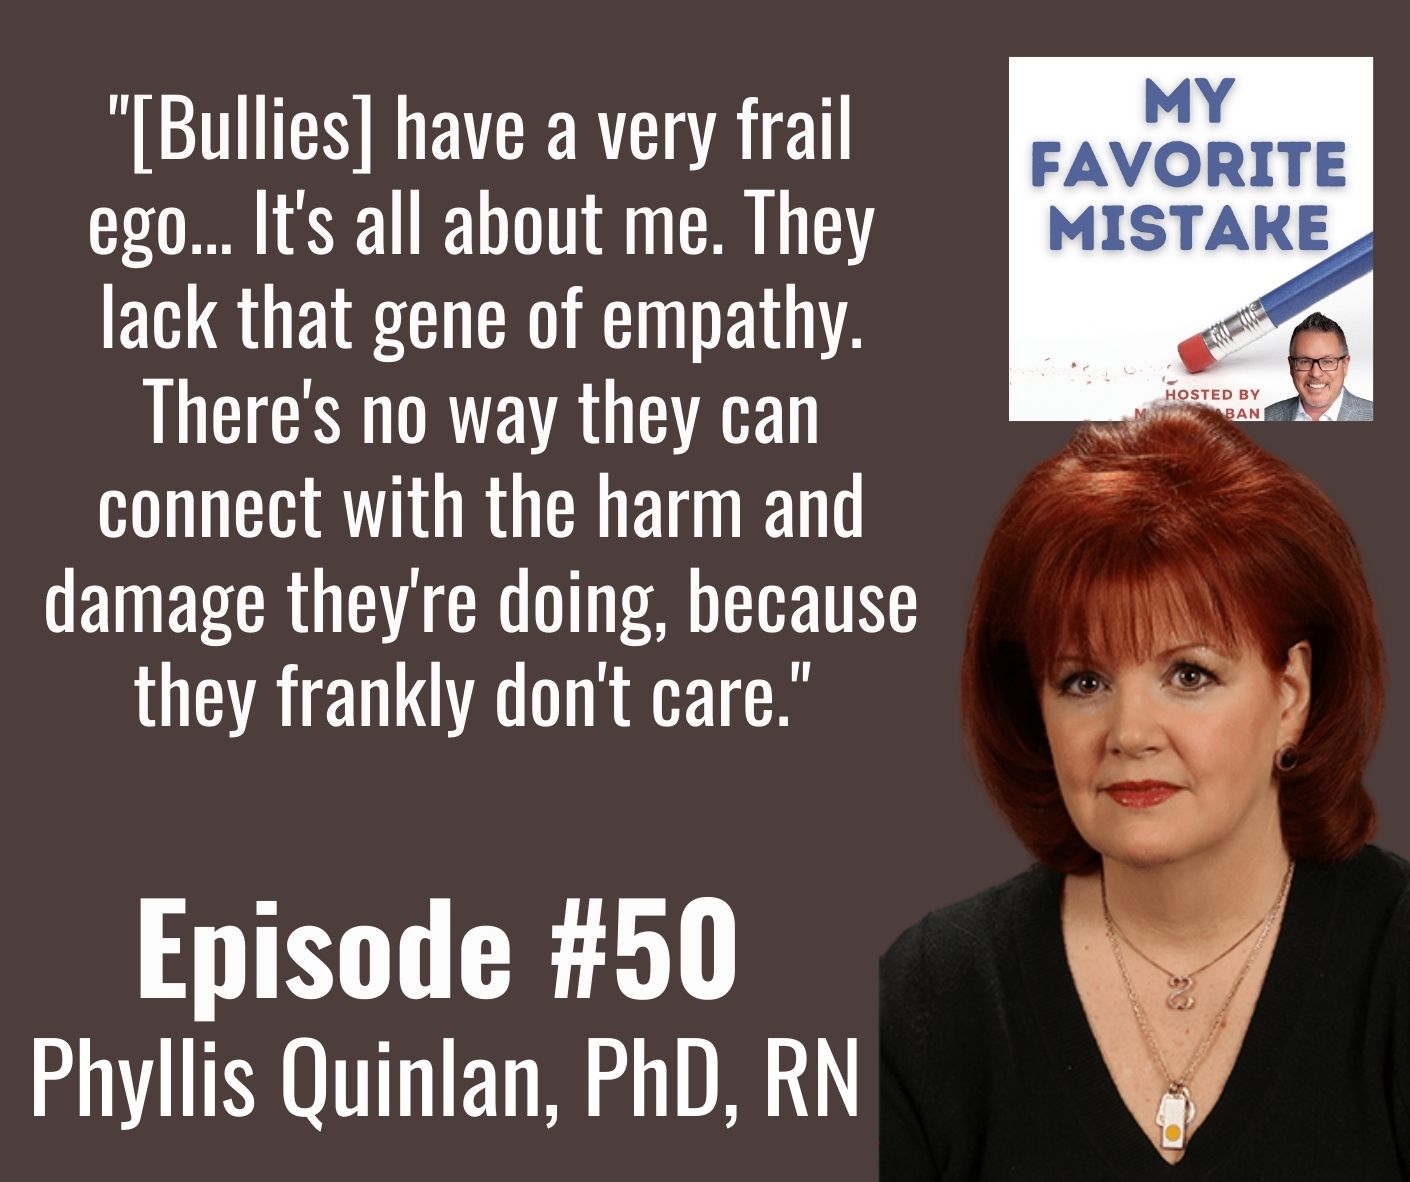 "[Bullies] have a very frail ego... It's all about me. They lack that gene of empathy. There's no way they can connect with the harm and damage they're doing, because they frankly don't care." 